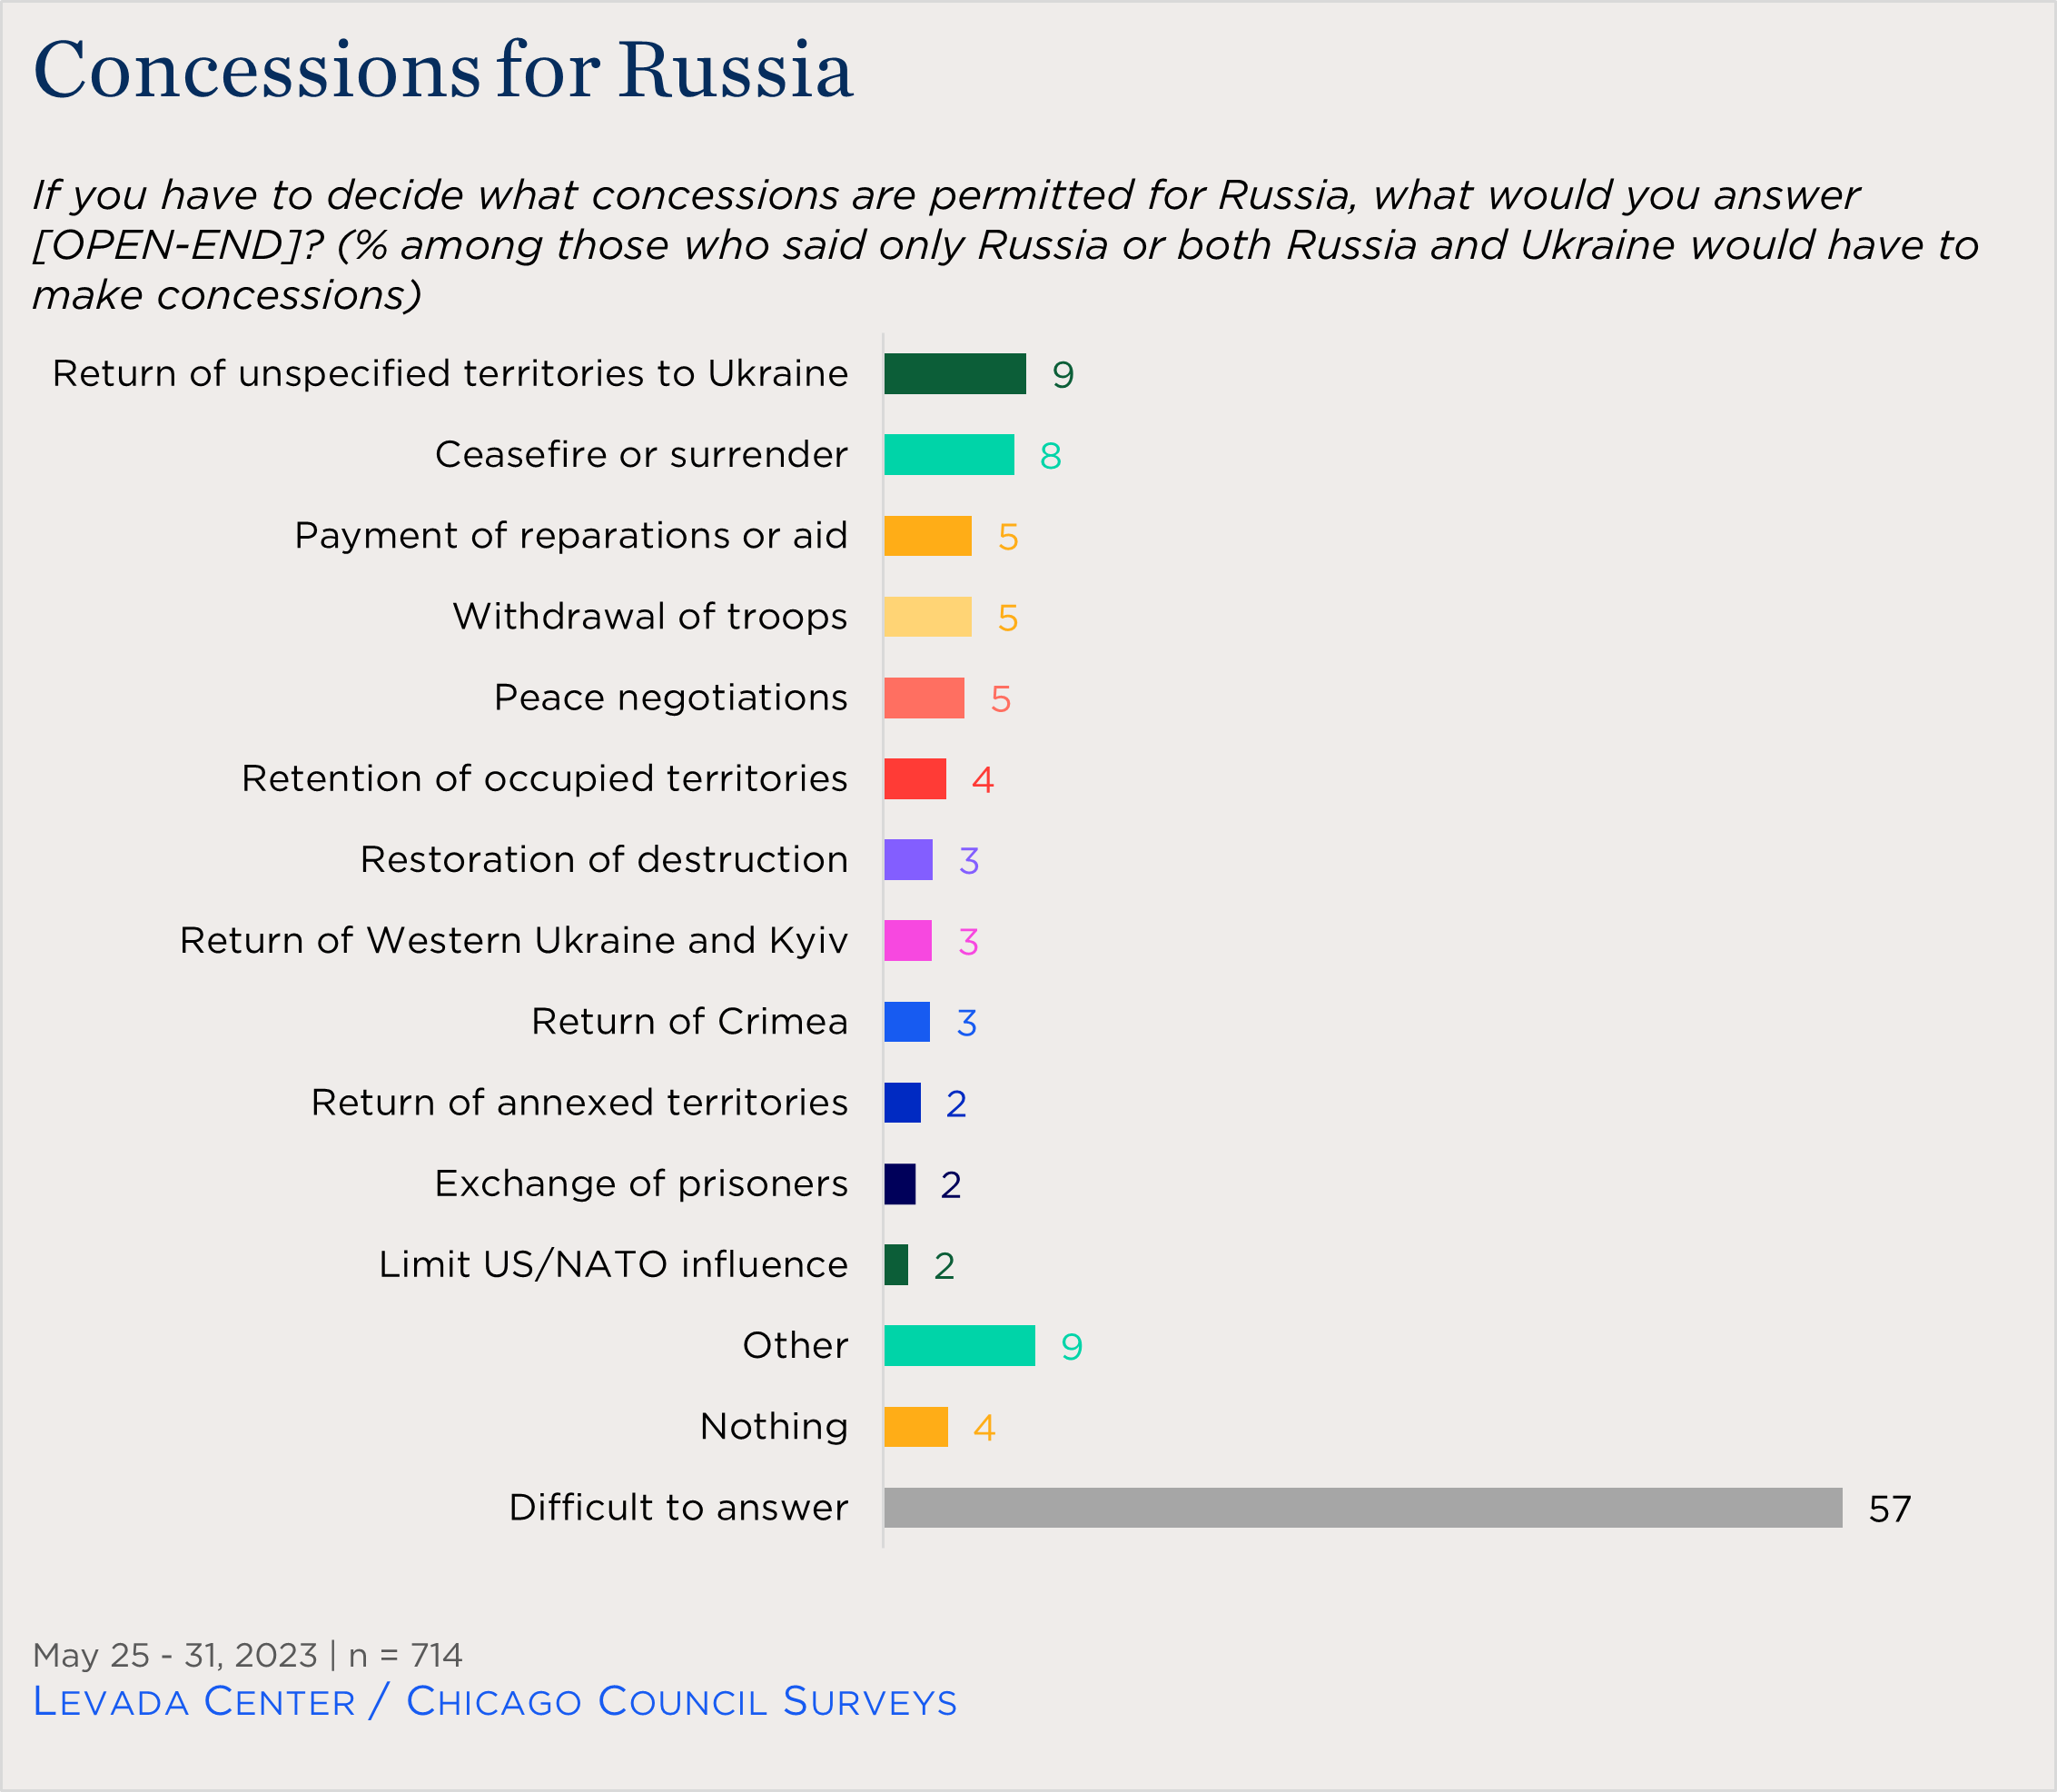 "bar chart showing open-ended responses on Russian views of concessions for Russia to end Ukraine conflict"